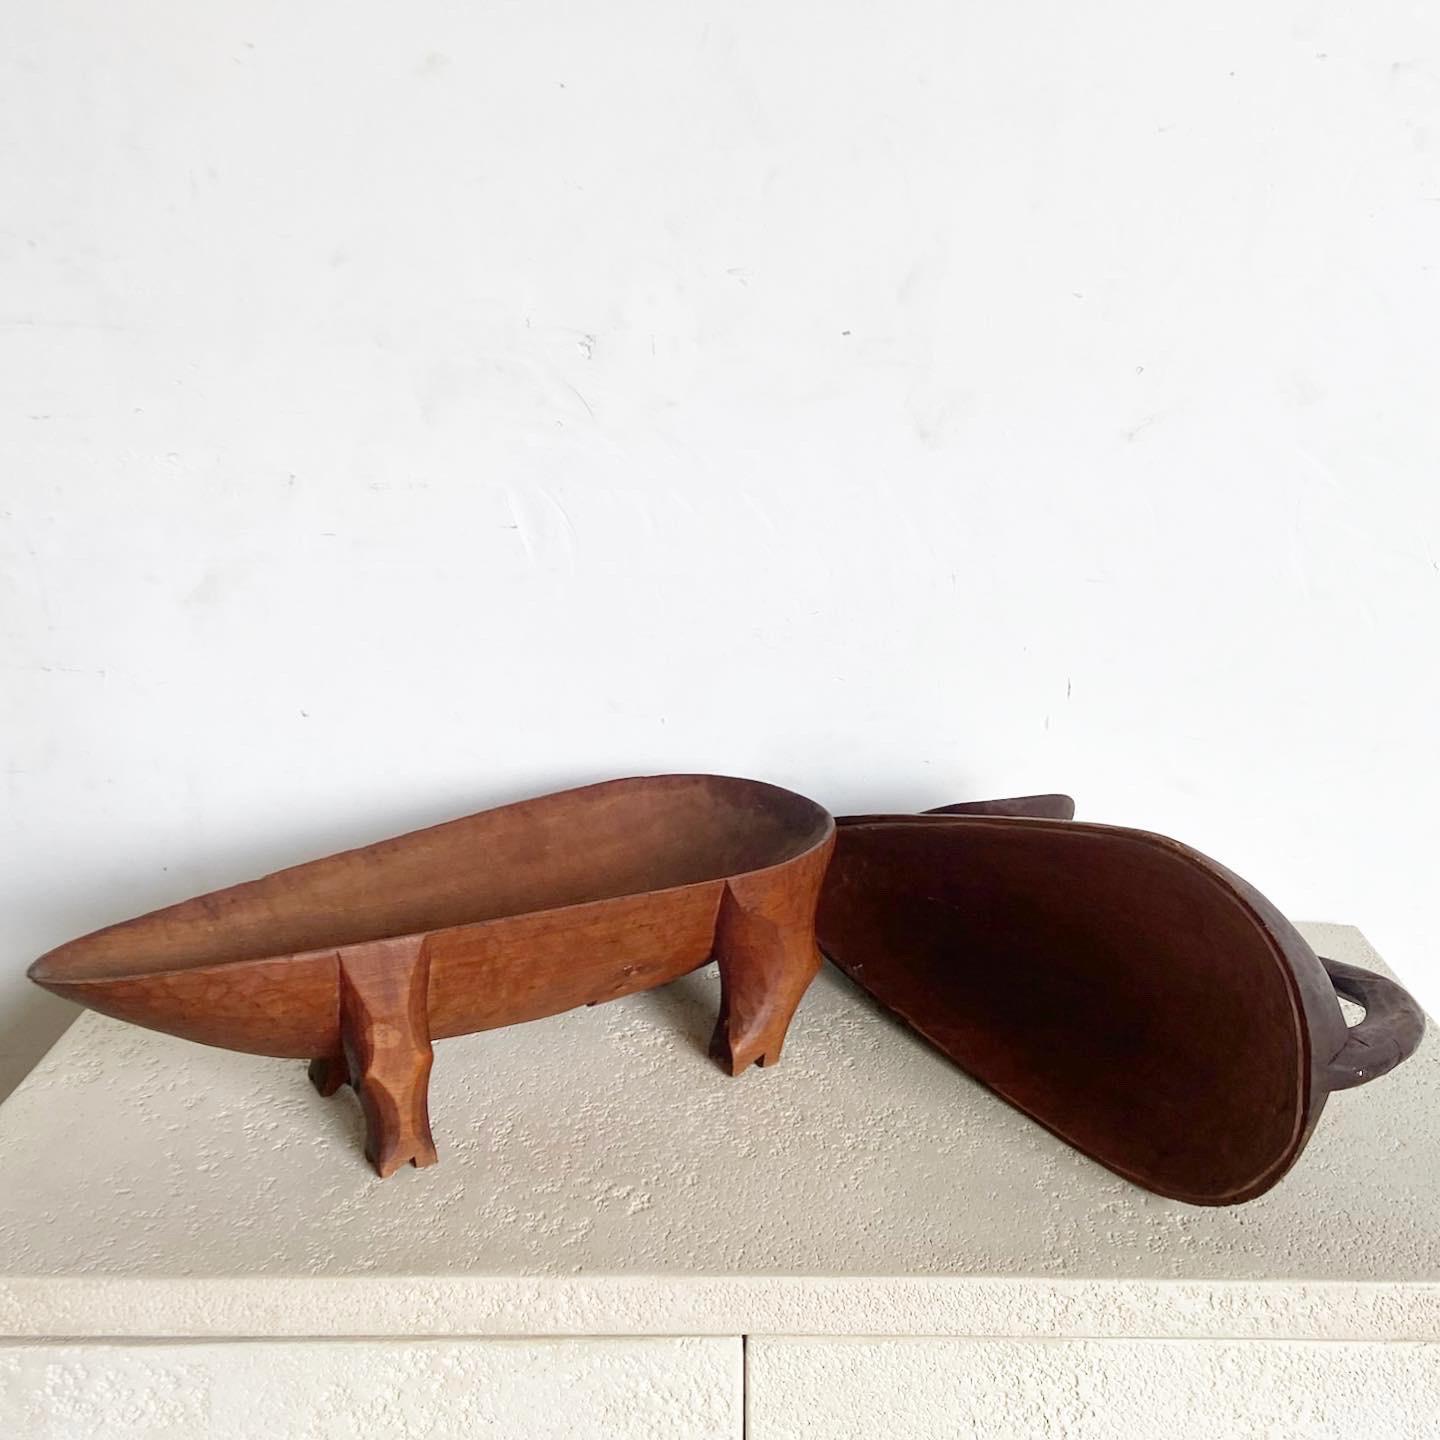 This Vintage Hand Carved Wooden Pig Container/Tray offers whimsical functionality. Crafted from solid wood, the removable top half reveals a shallow bowl for storage or serving, making it an interesting and practical addition to any setting.
Vintage